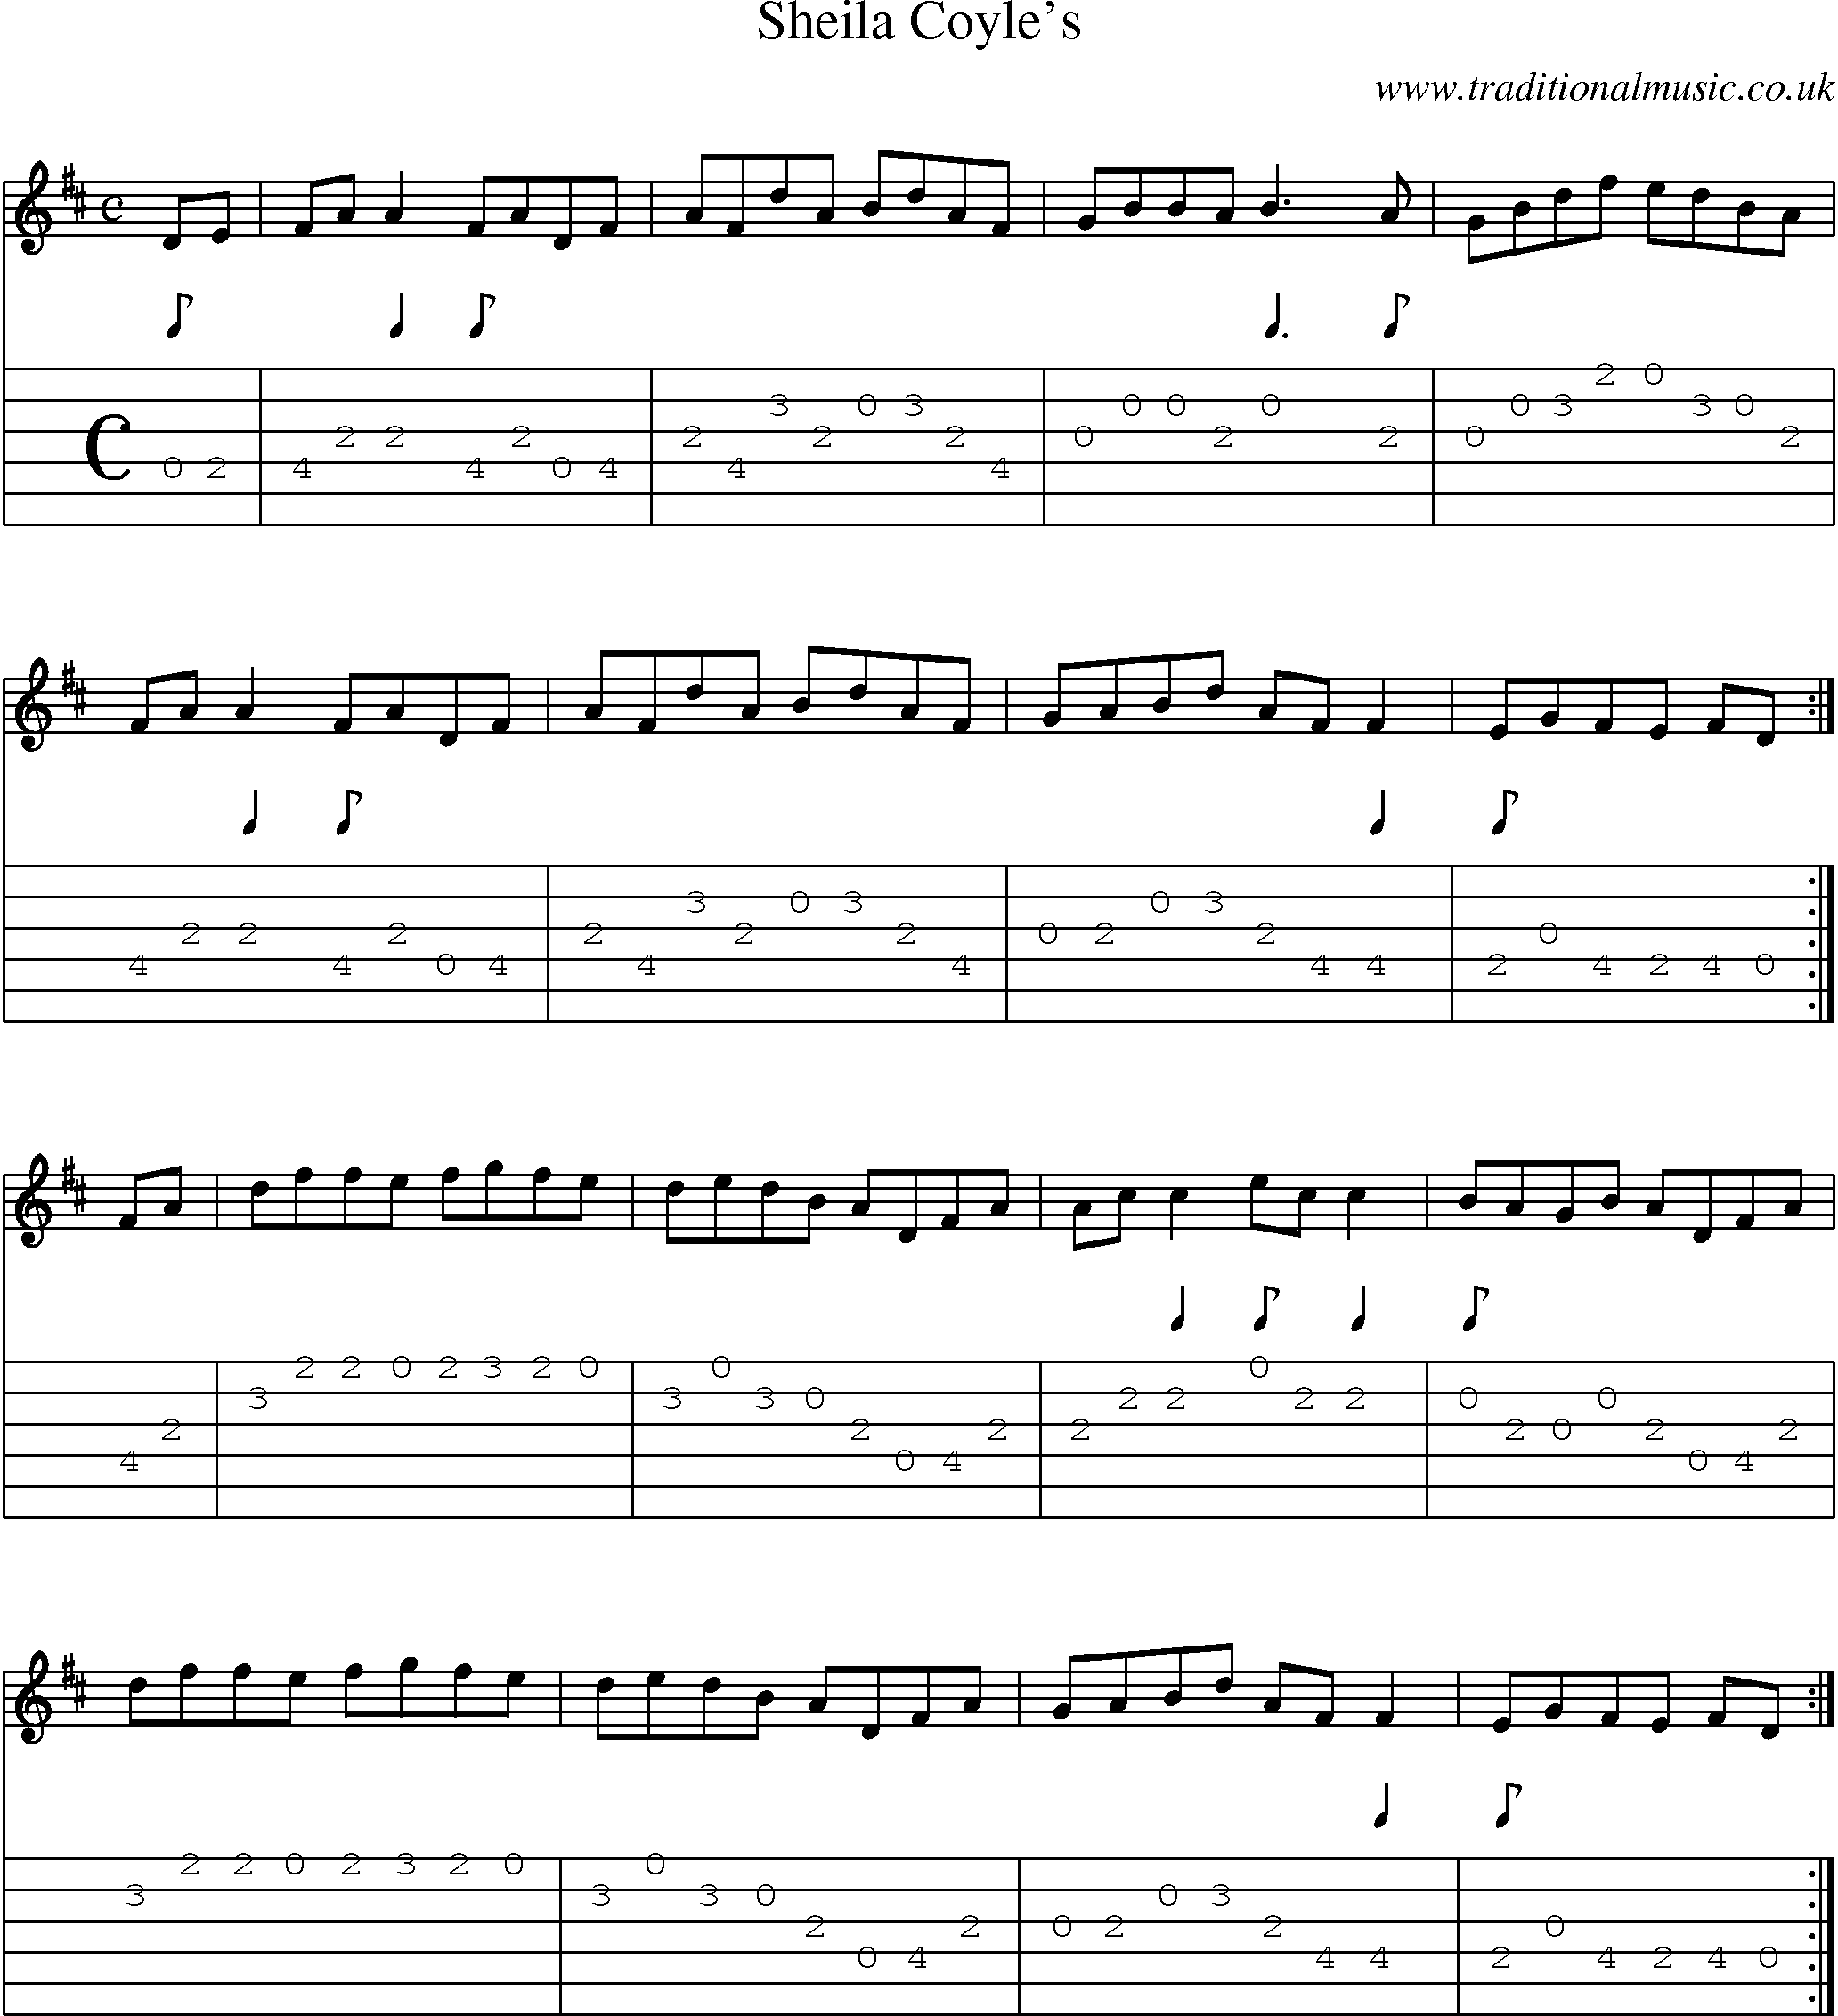 Music Score and Guitar Tabs for Sheila Coyles